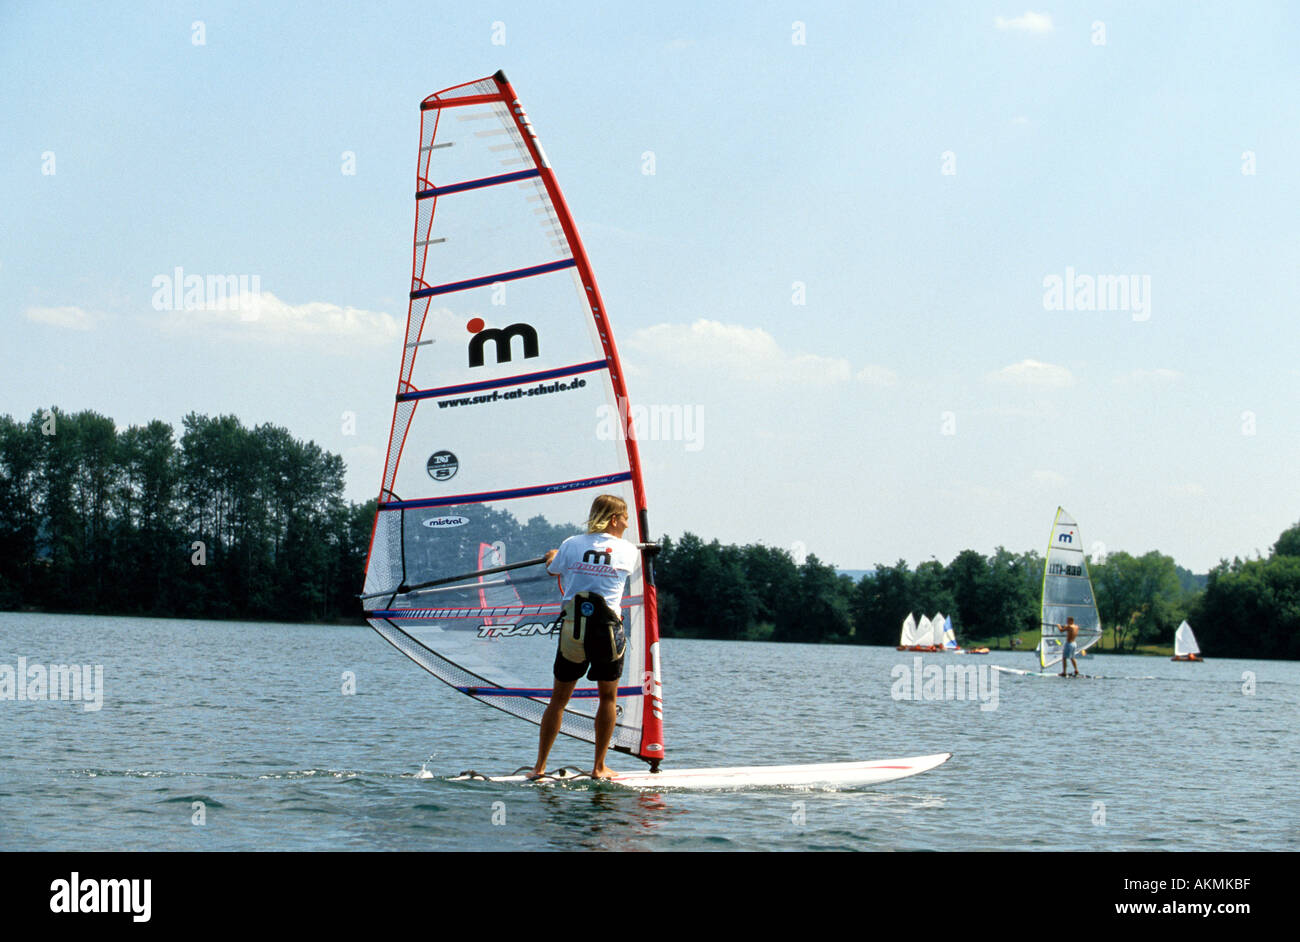 Germany Free time Young man surfing  Stock Photo